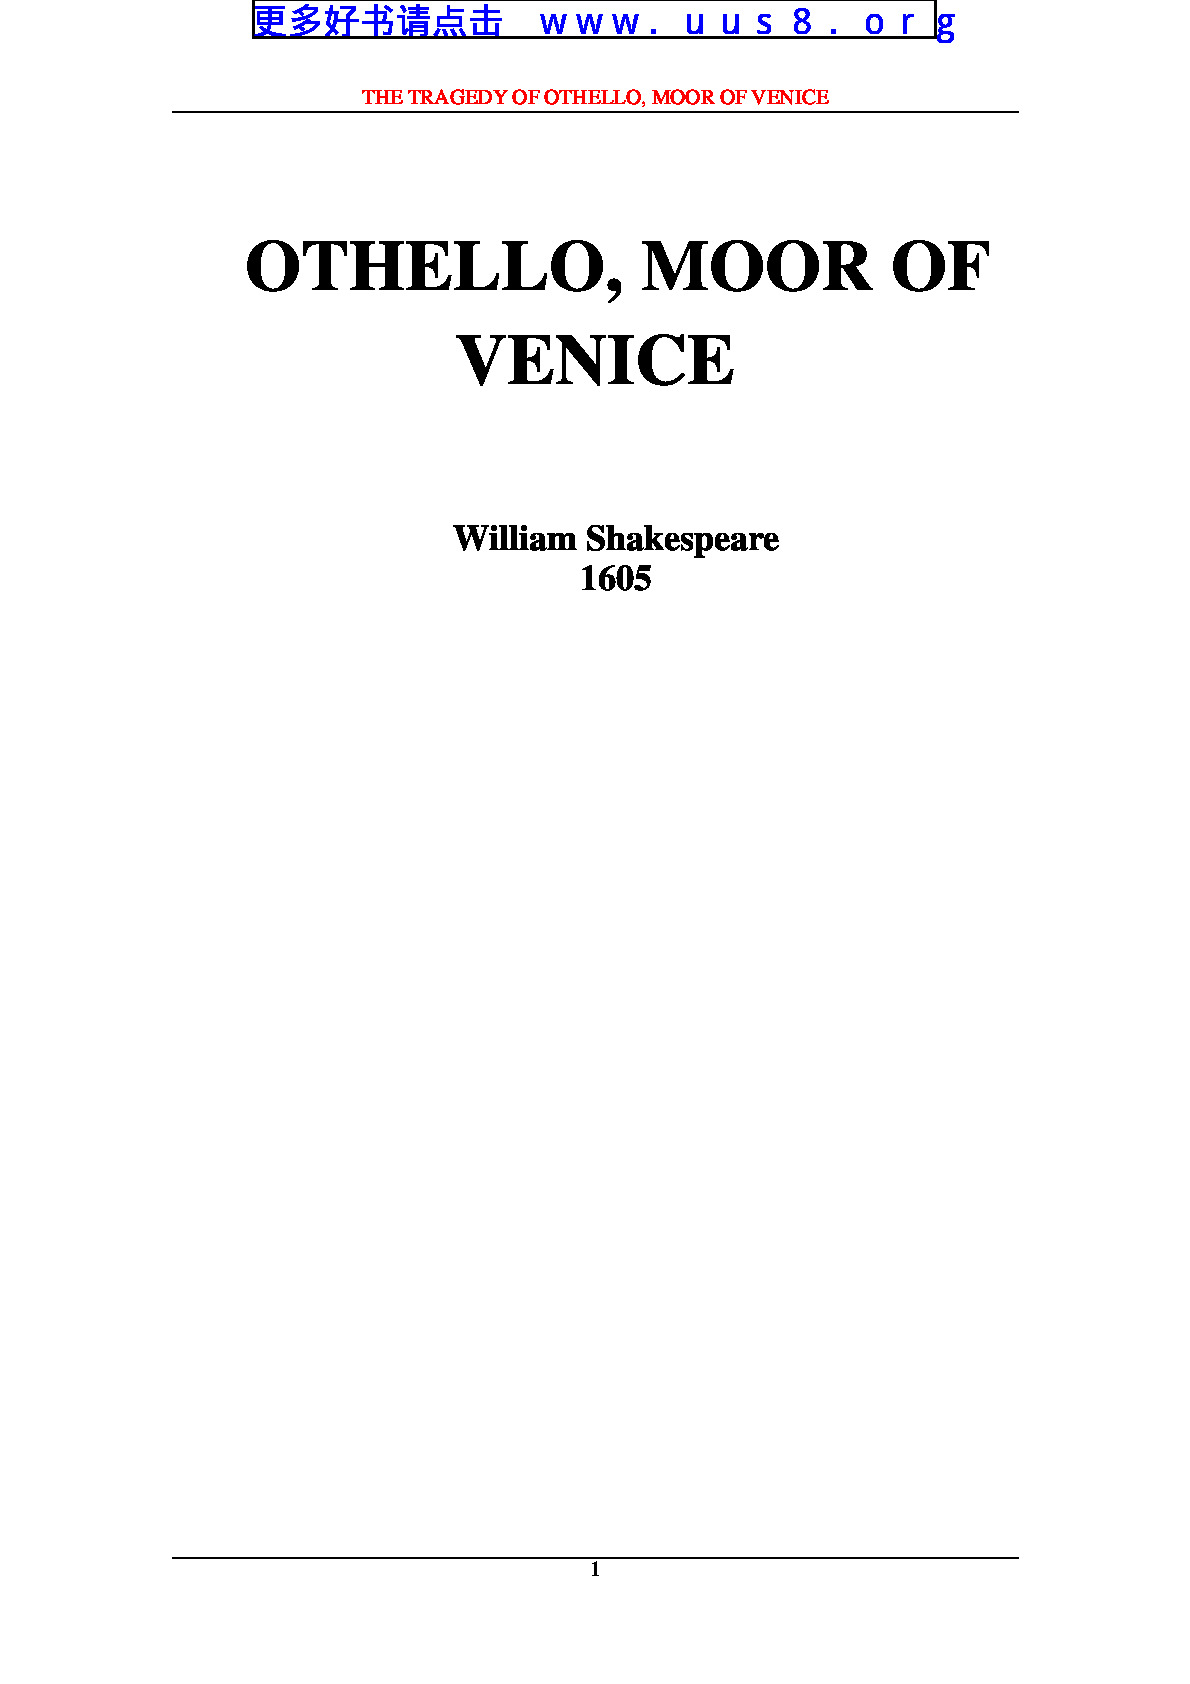 Othello,The_Moor_of_Venice(奥塞罗) – 副本